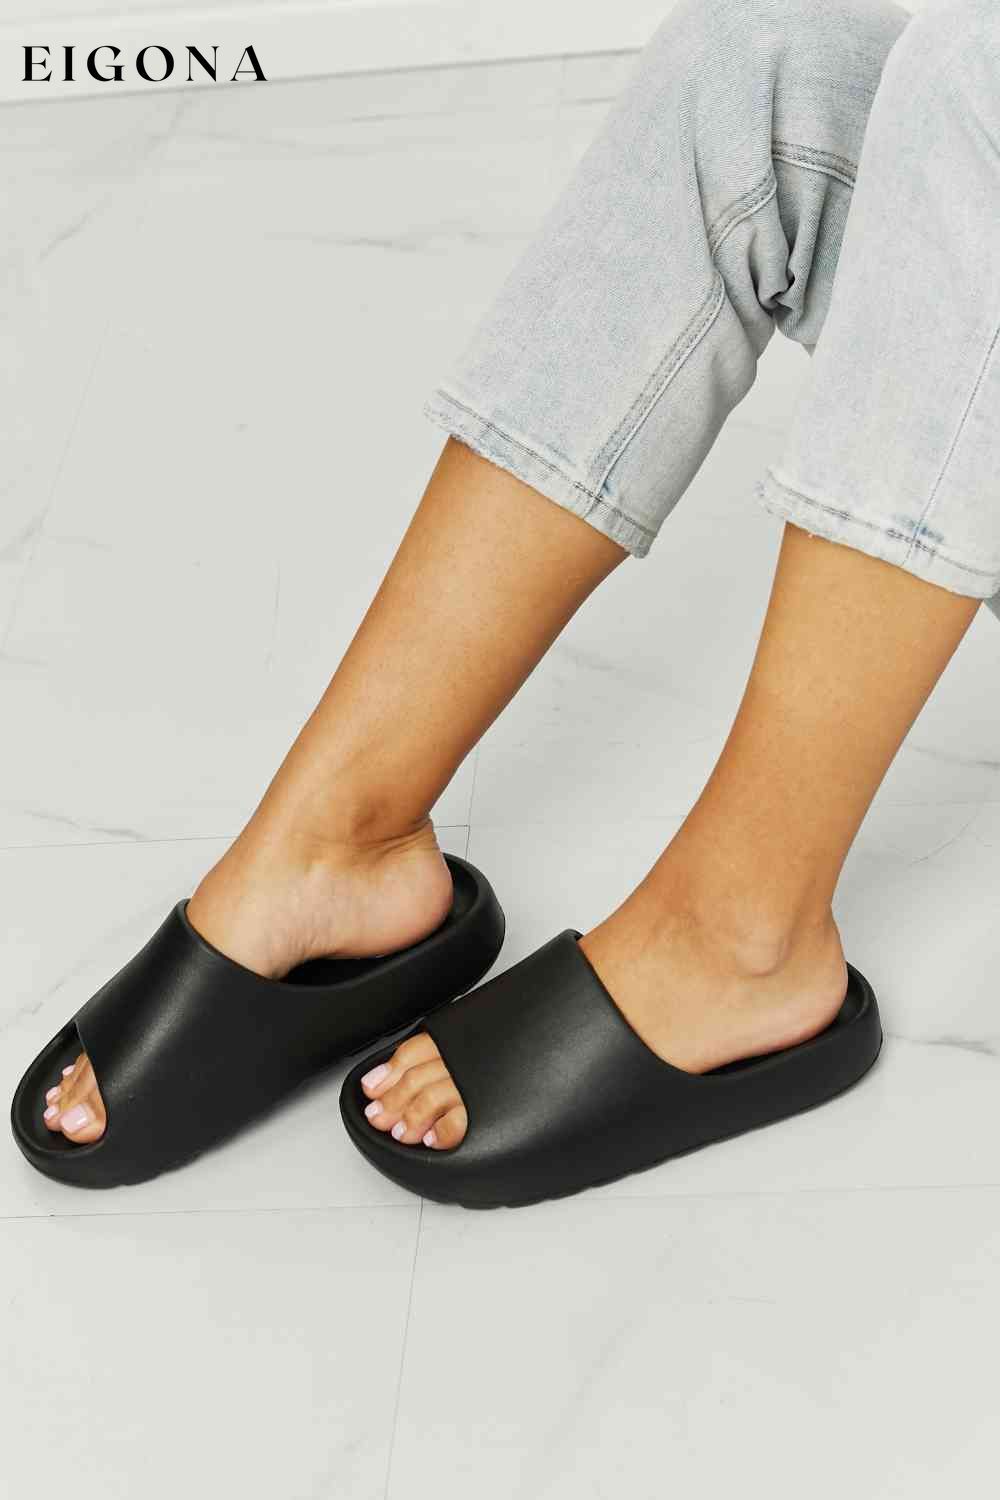 Slides in Black NOOK JOI Ship from USA shoes womens shoes